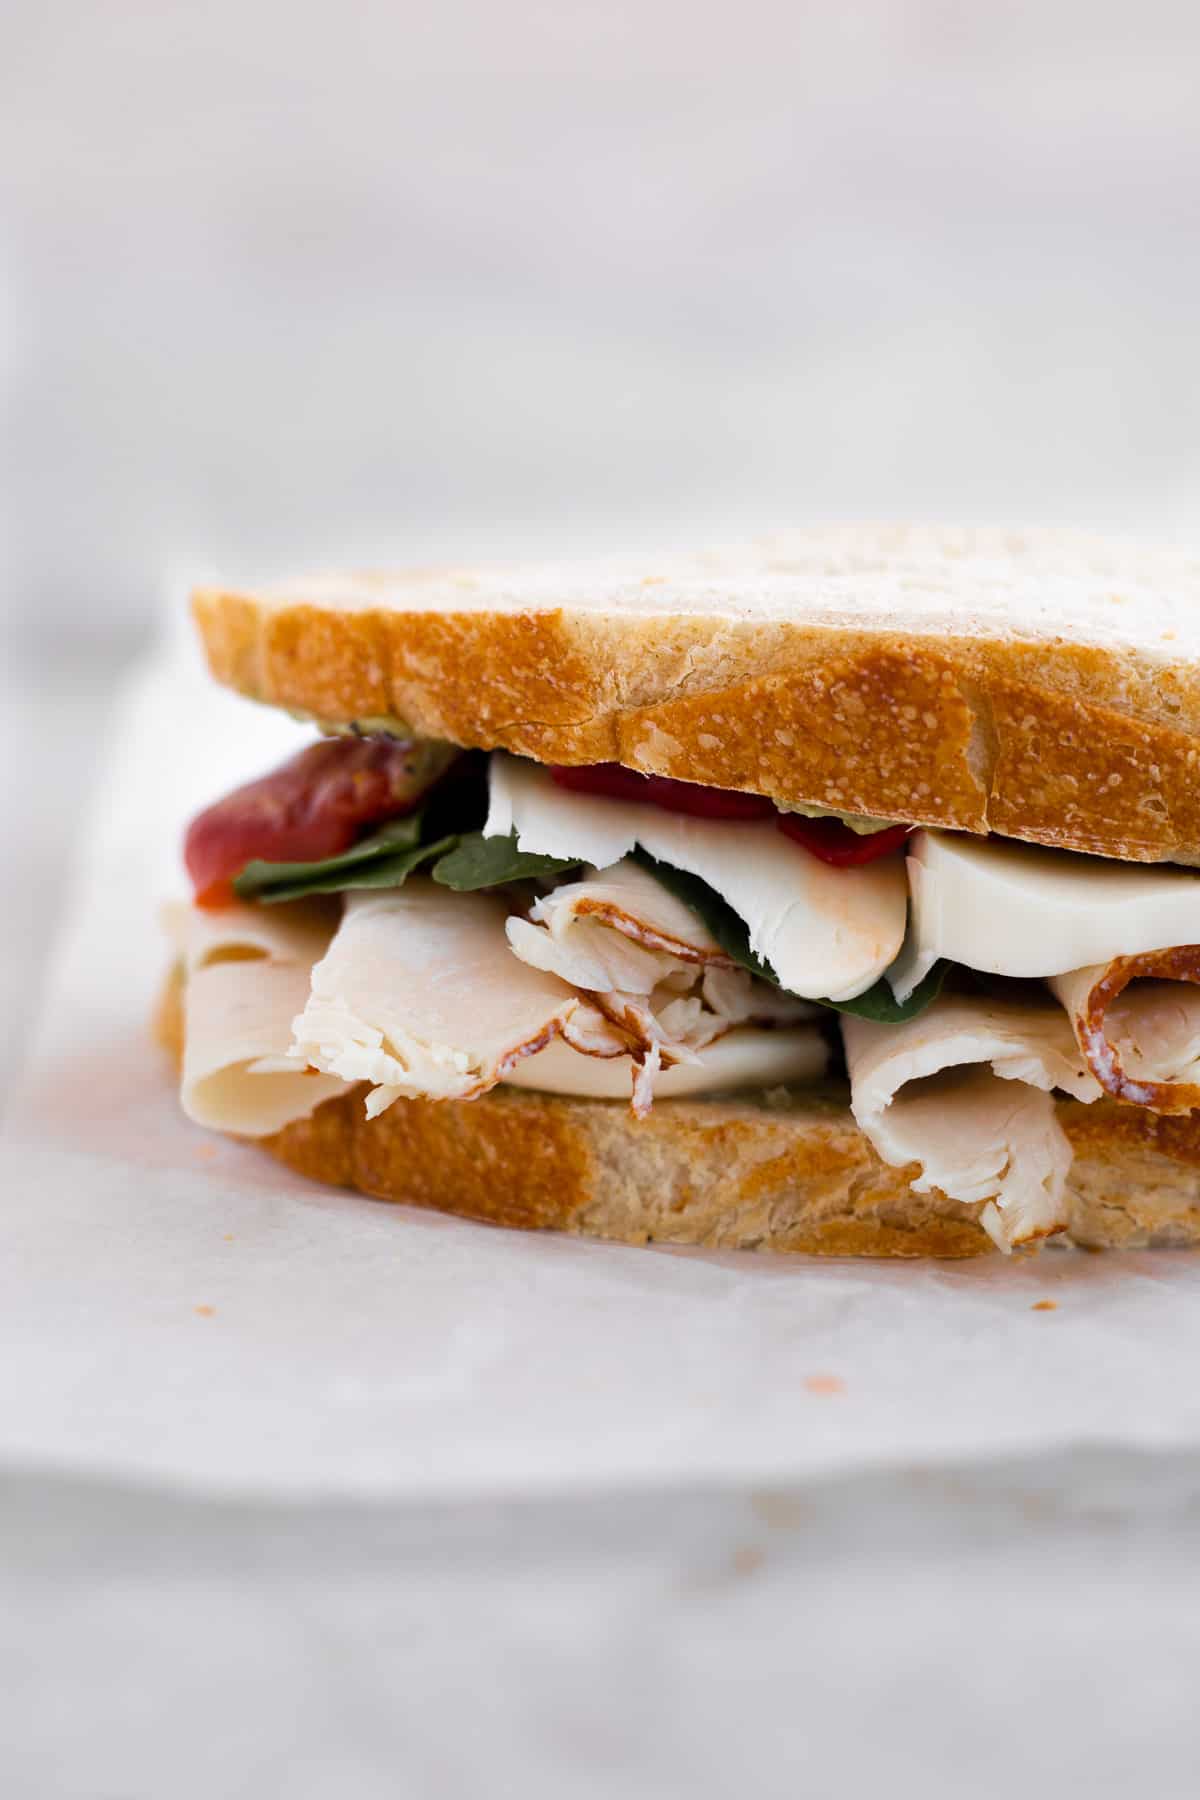 sourdough bread sandwich with turkey, cheese, spinach, and red peppers.